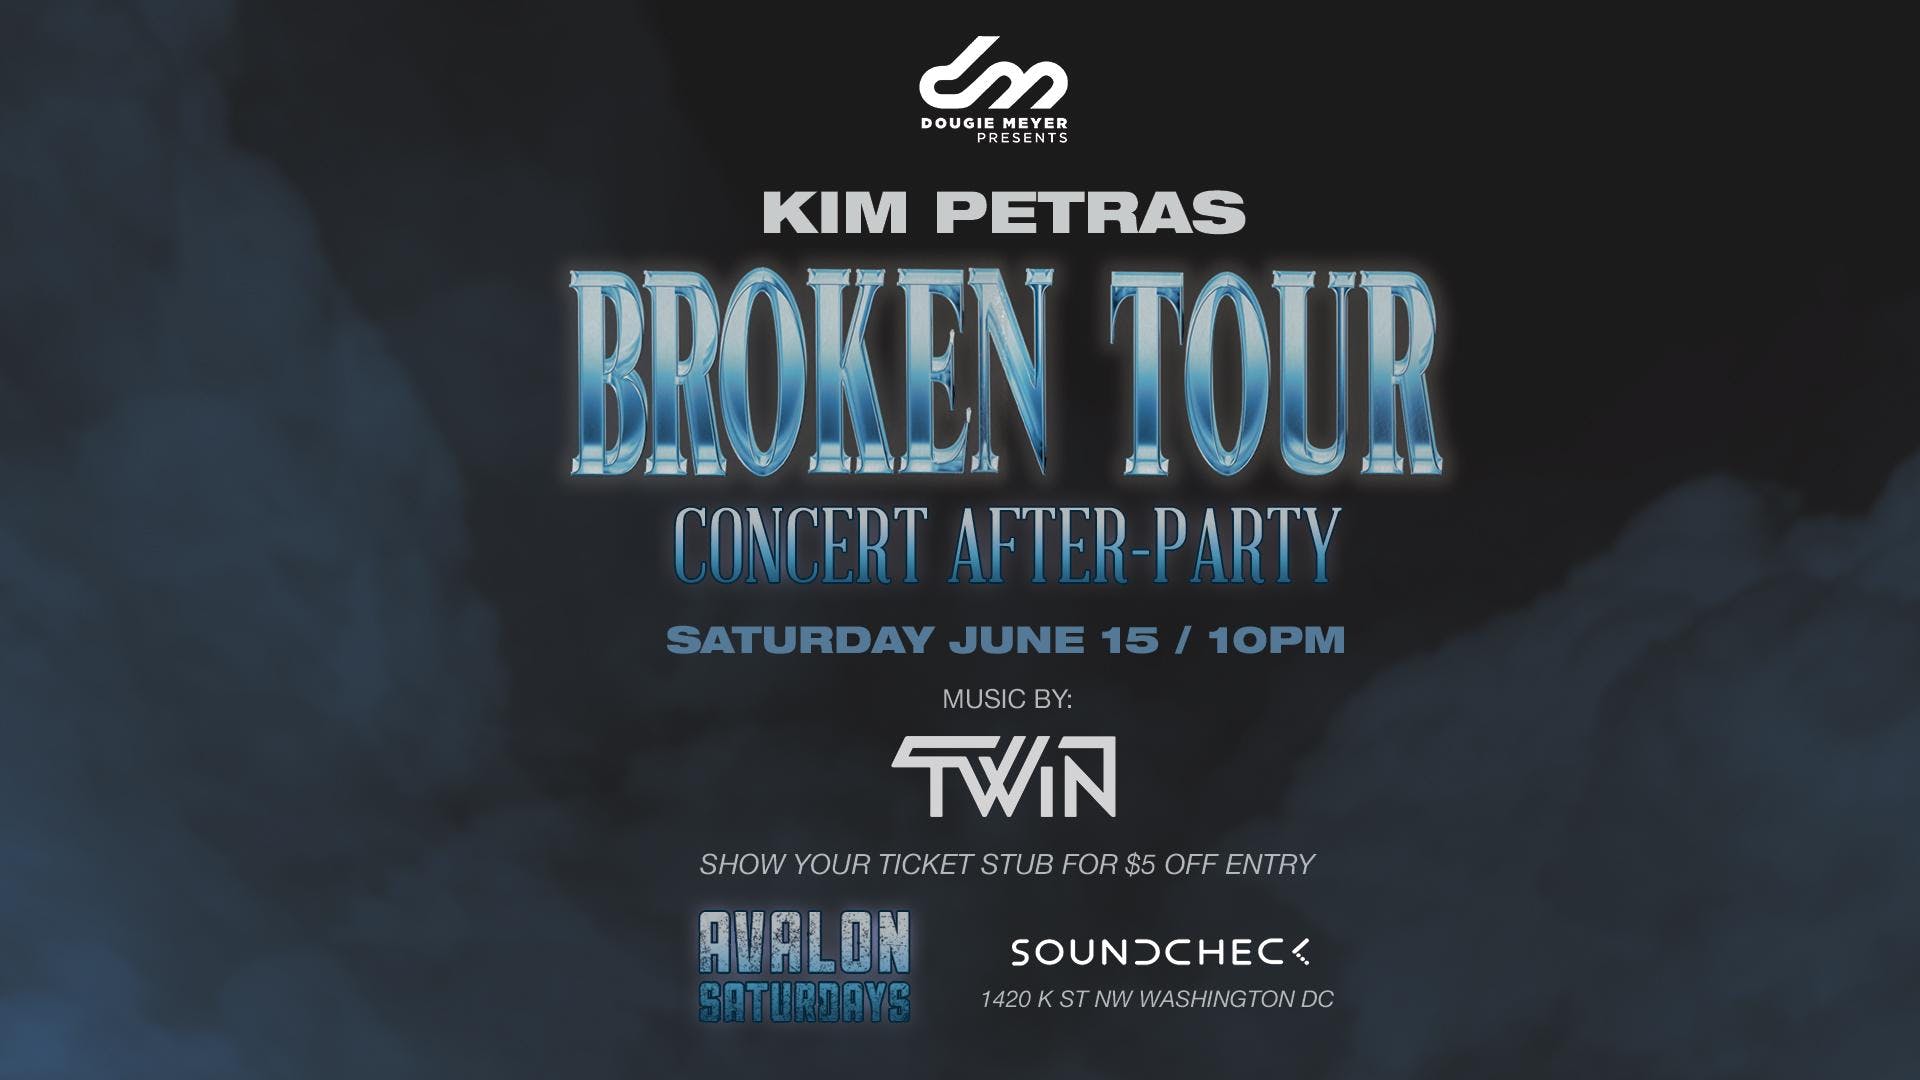 Kim Petras Concert After Party With Twin At Soundcheck On 2019 06 15